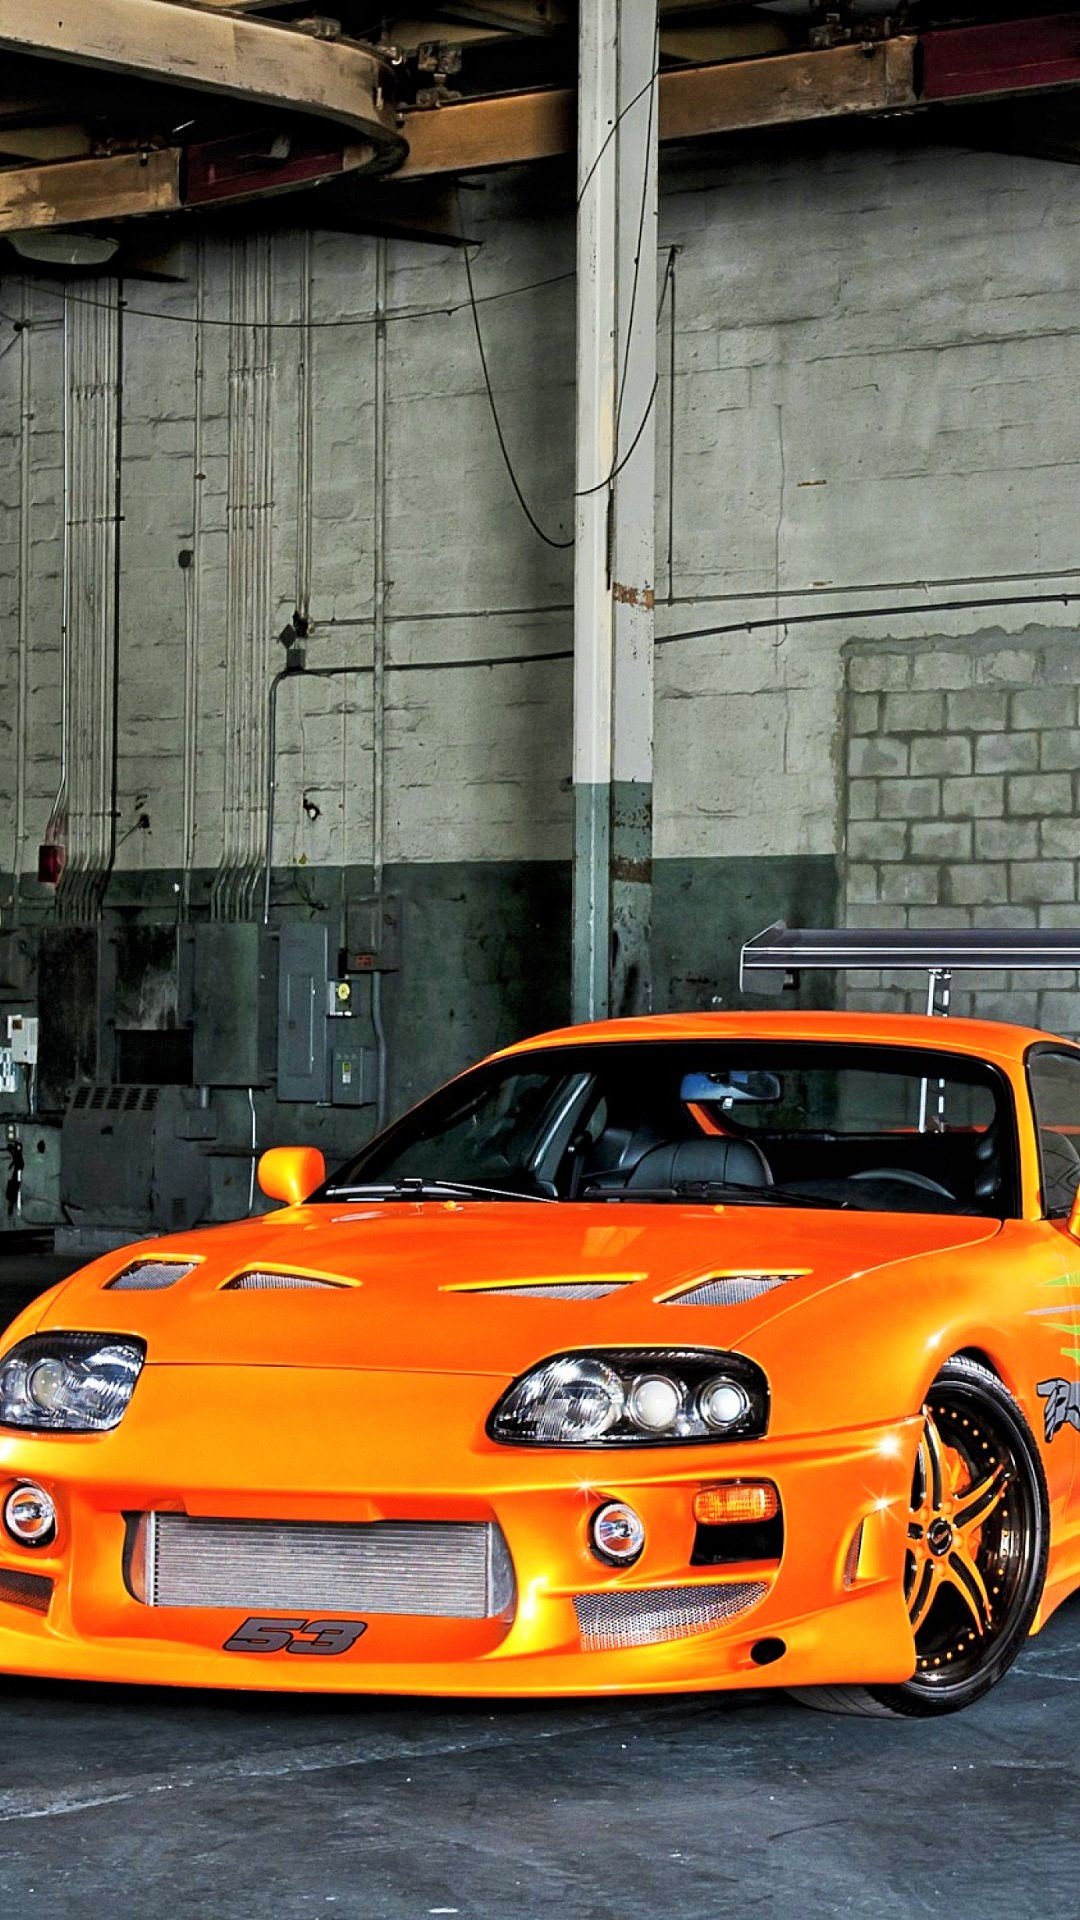 The Toyota Supra from 'The Fast & the Furious' just sold for $550k